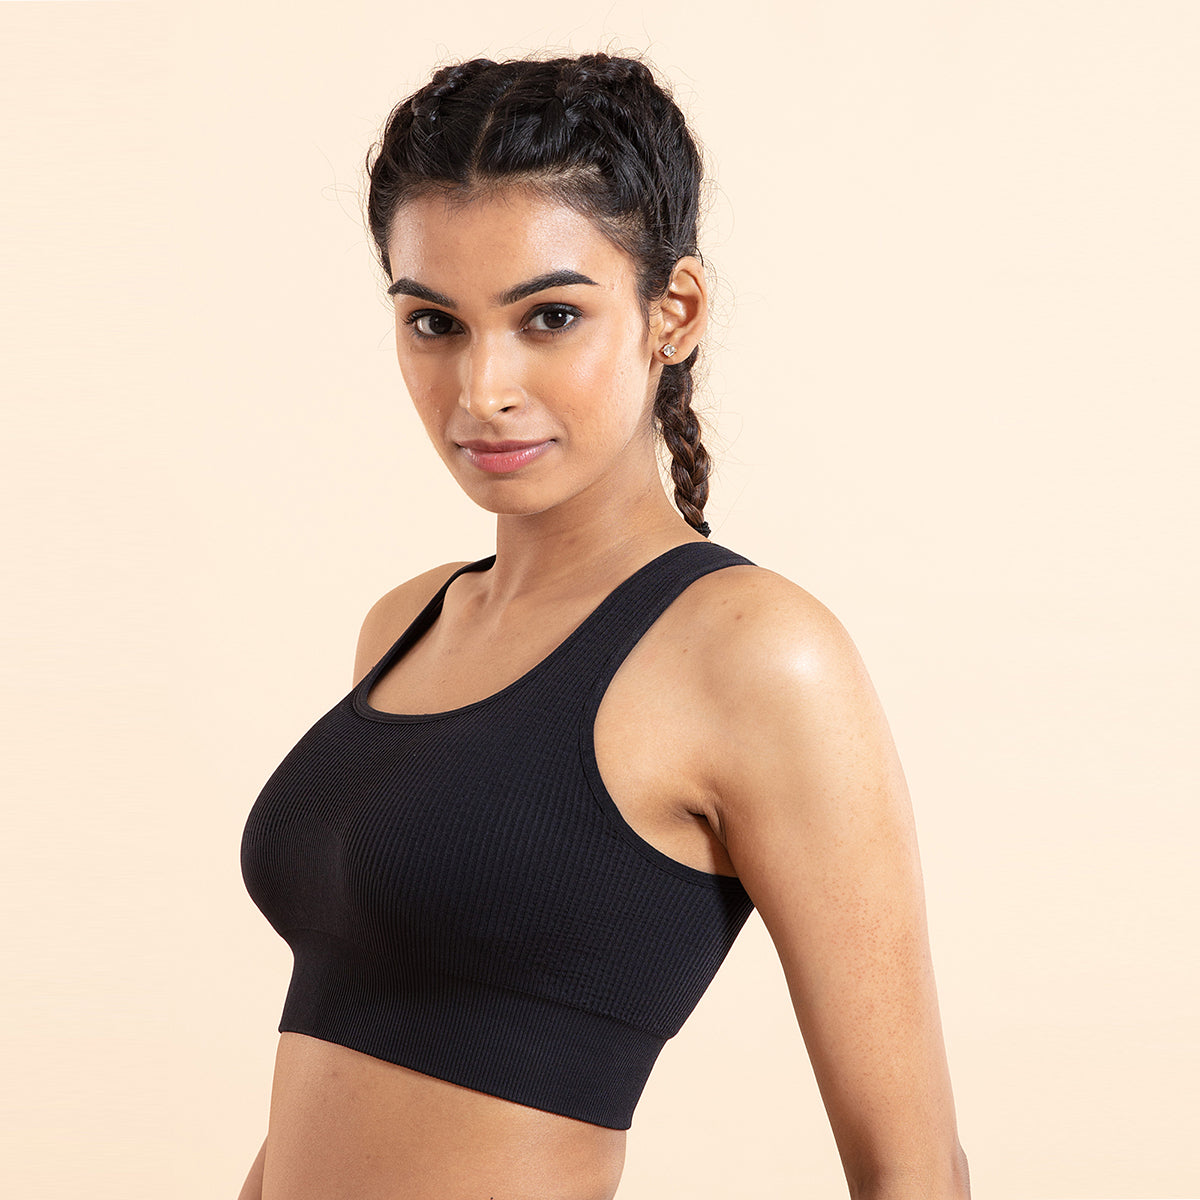 All Day Every Day Bra - Fabletics